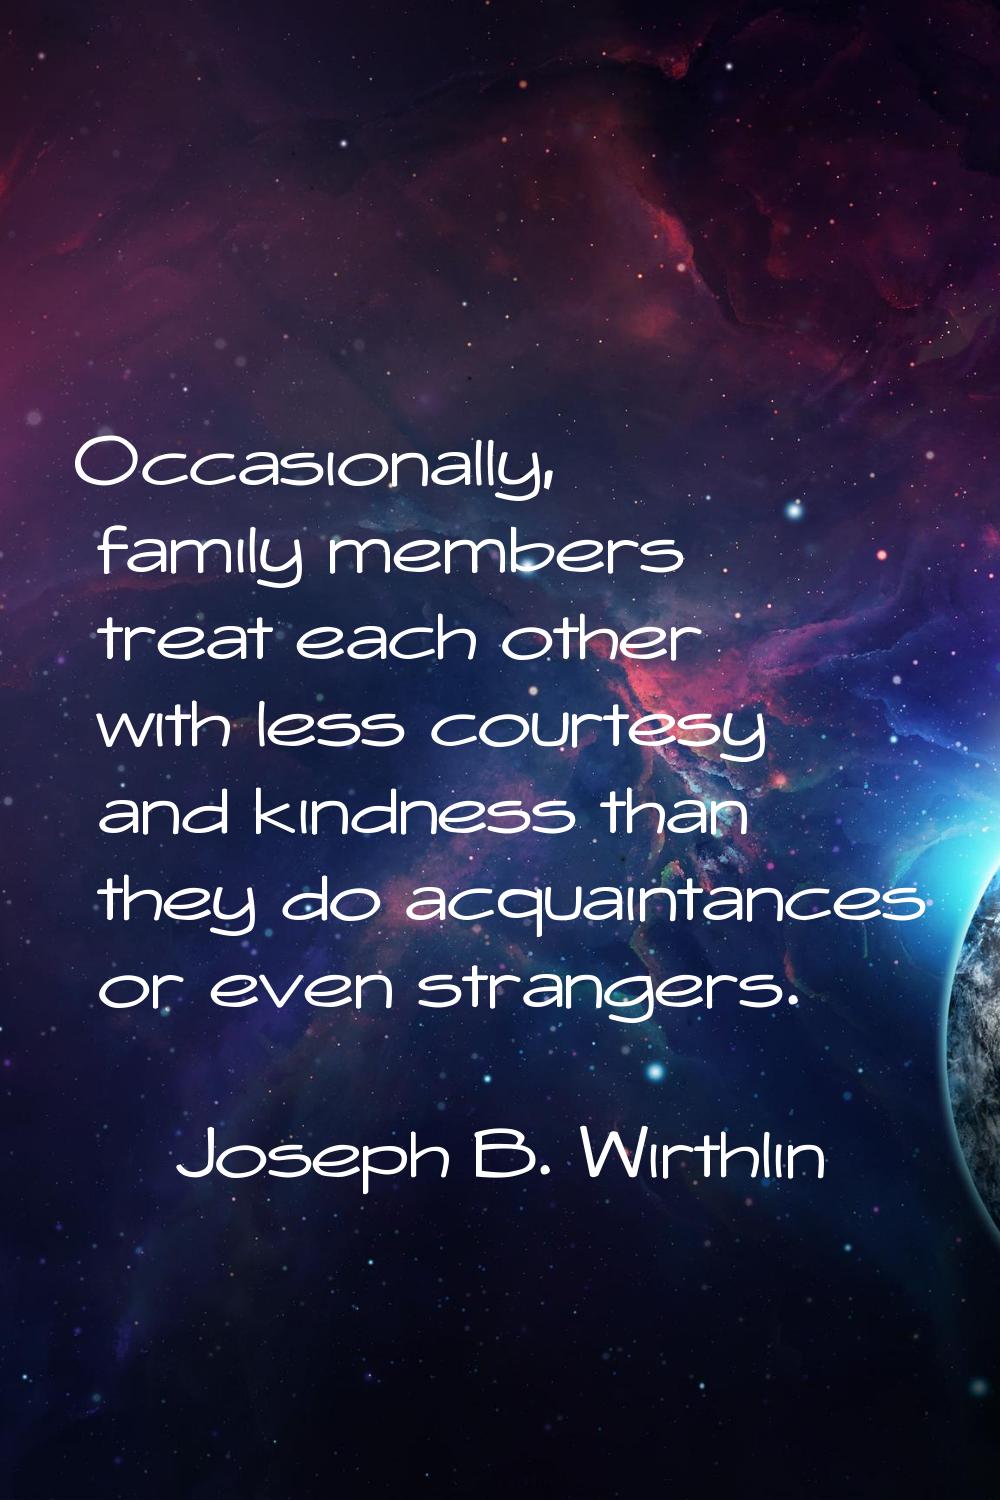 Occasionally, family members treat each other with less courtesy and kindness than they do acquaint